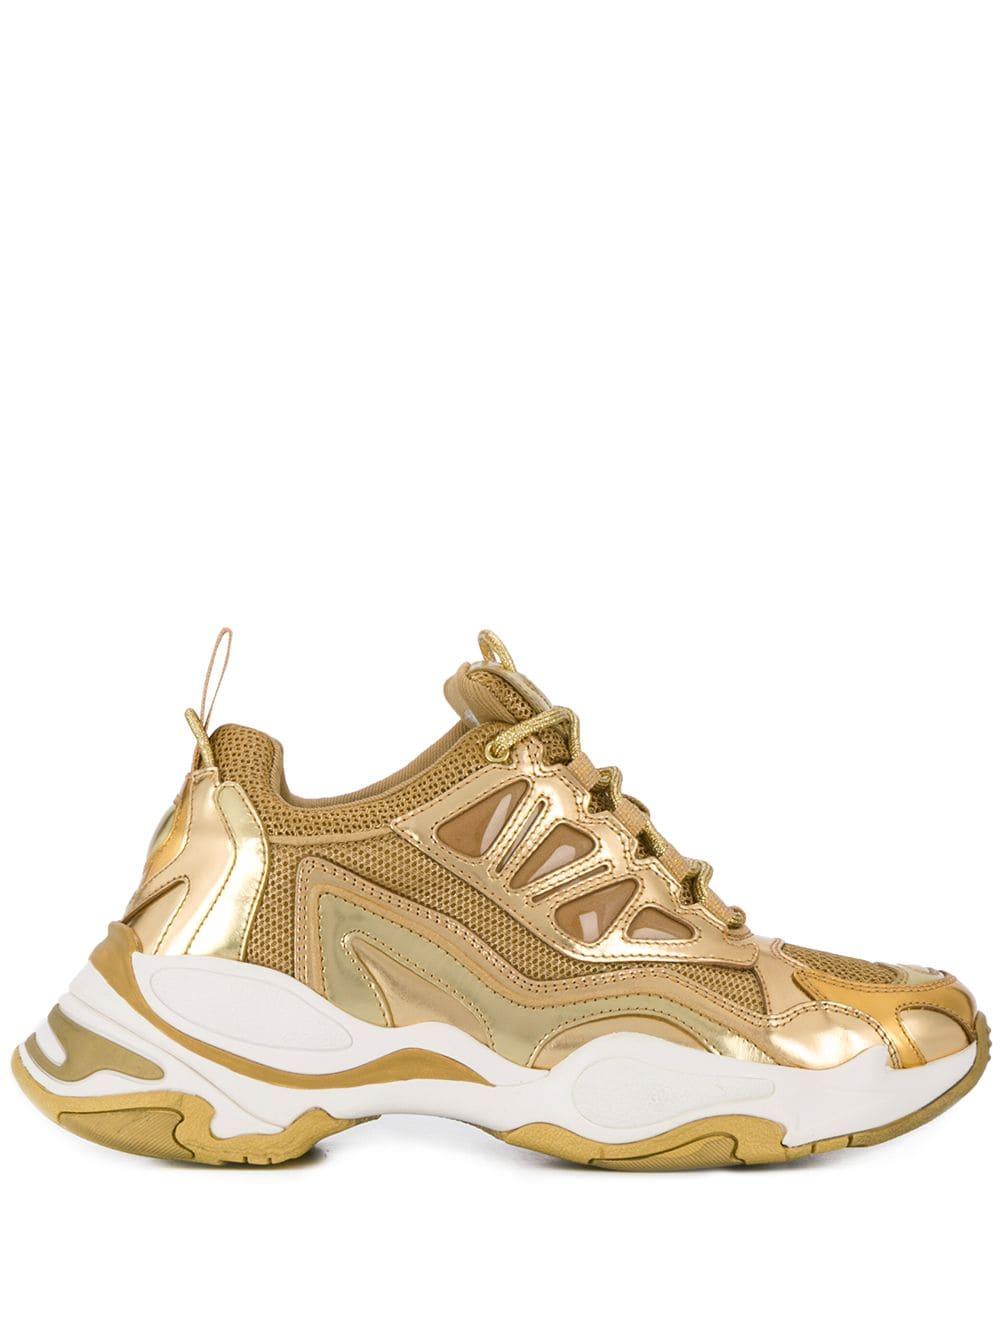 Sandro Rubber Astro Trainers in Gold (Metallic) - Lyst